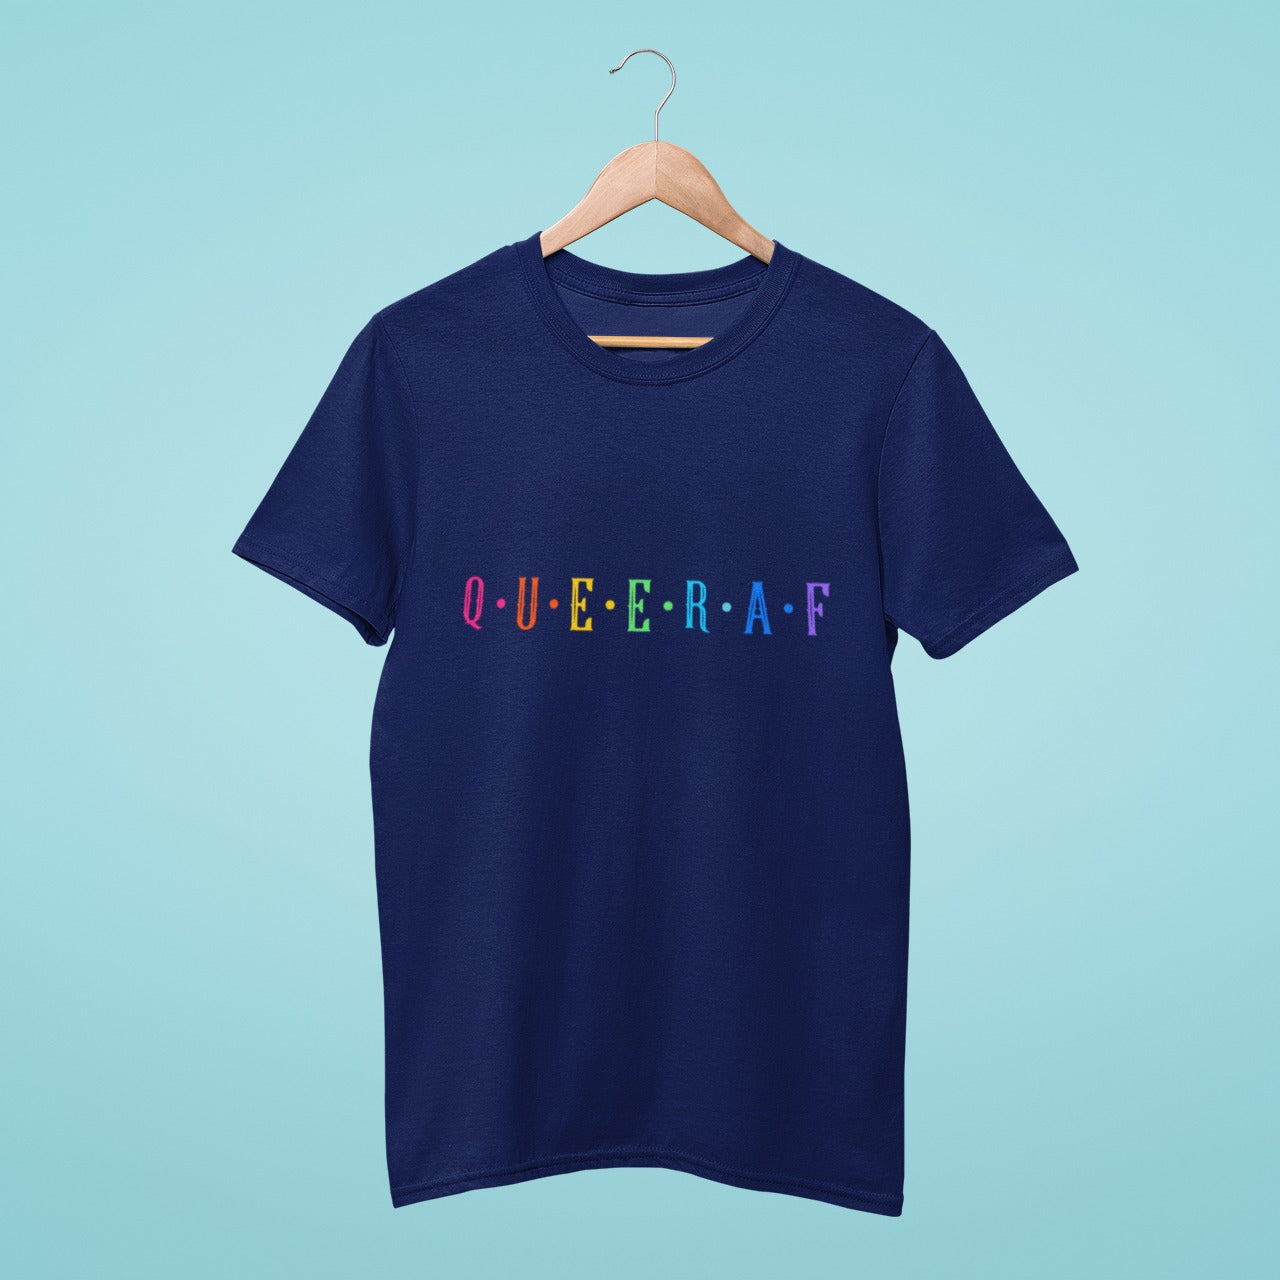 Express your queer identity in style with our navy blue t-shirt featuring "Q U E E R A F" in rainbow colors. Made from high-quality materials, this tee is perfect for LGBTQ+ events and rallies. Show your pride with the bold and vibrant design that is sure to make a statement. Order now and add this powerful and uplifting t-shirt to your wardrobe, letting the world know that you are proud to be who you are!